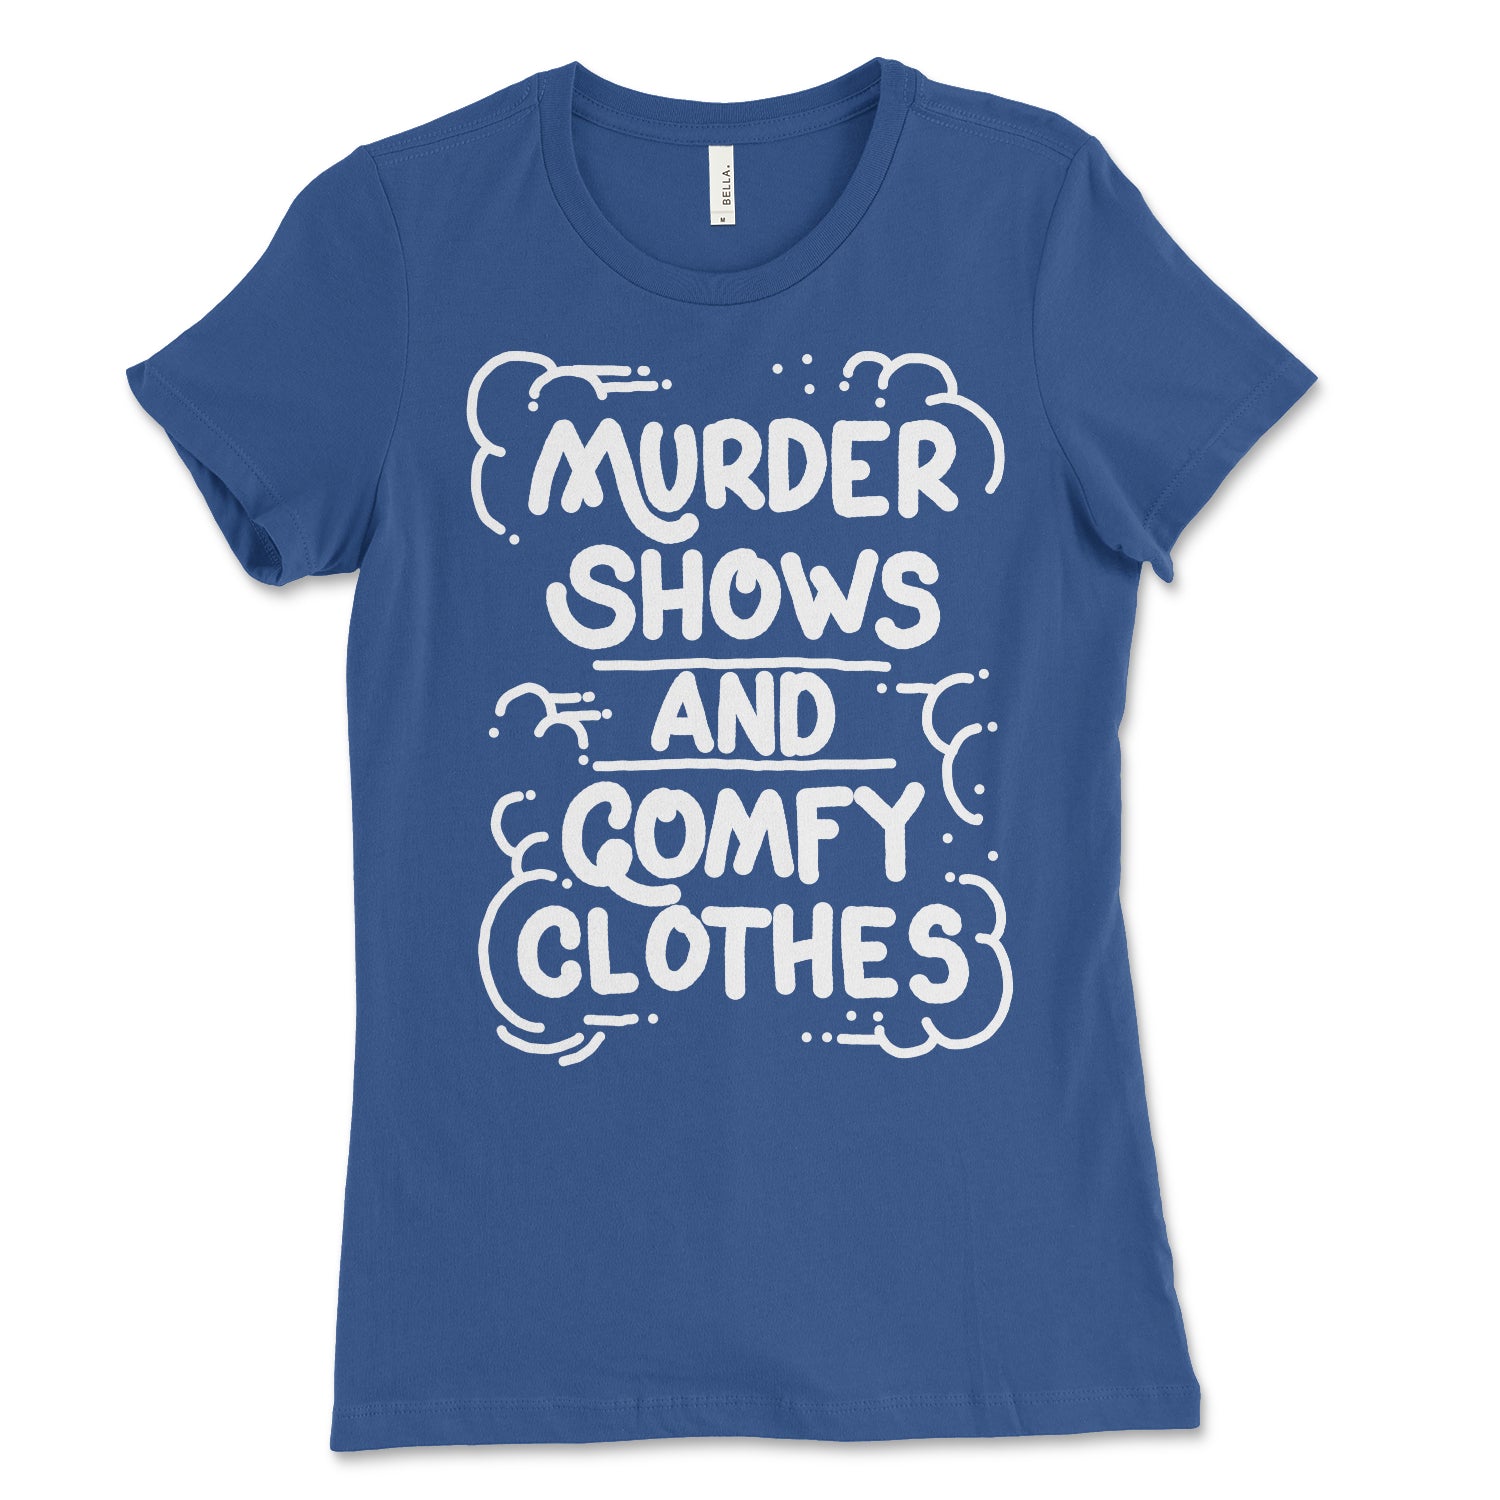  Women Funny Shirts I Like Murder Shows Comfy Clothes